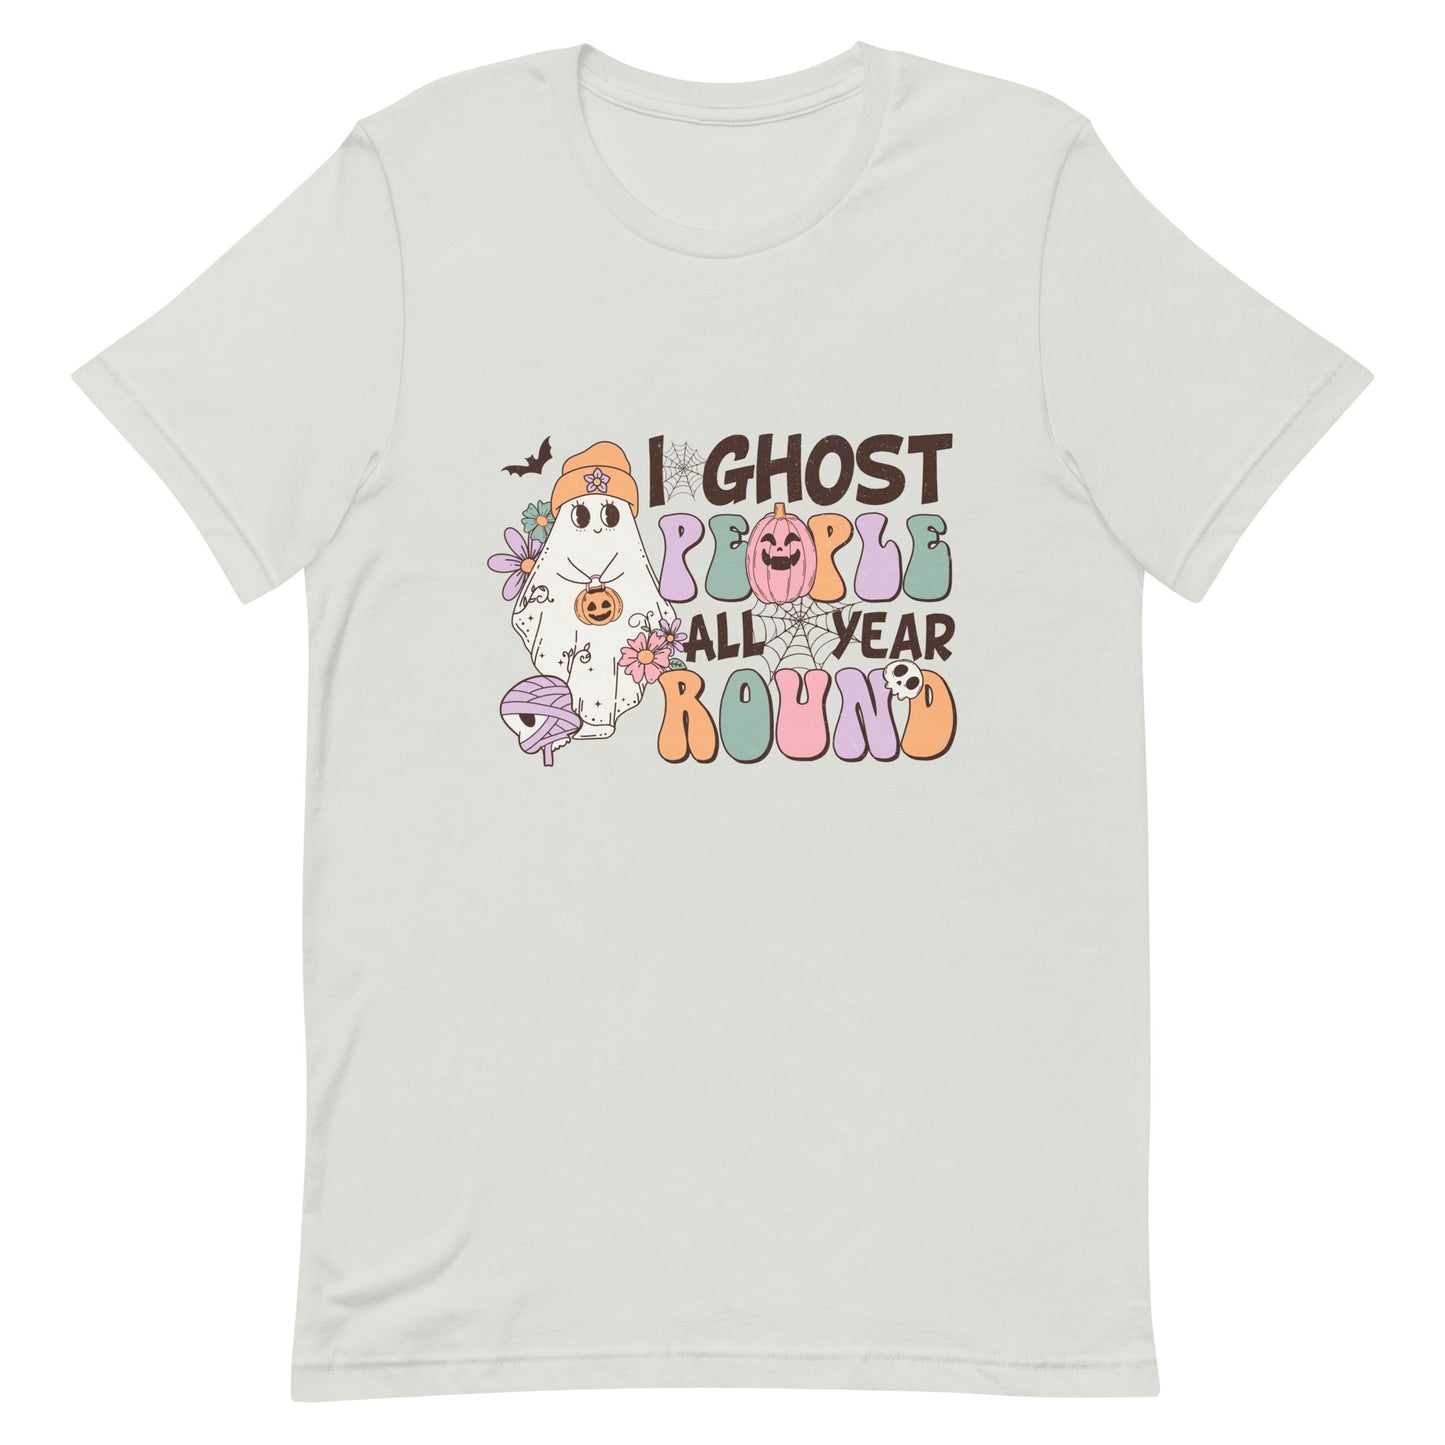 I ghost people year-round t-shirt